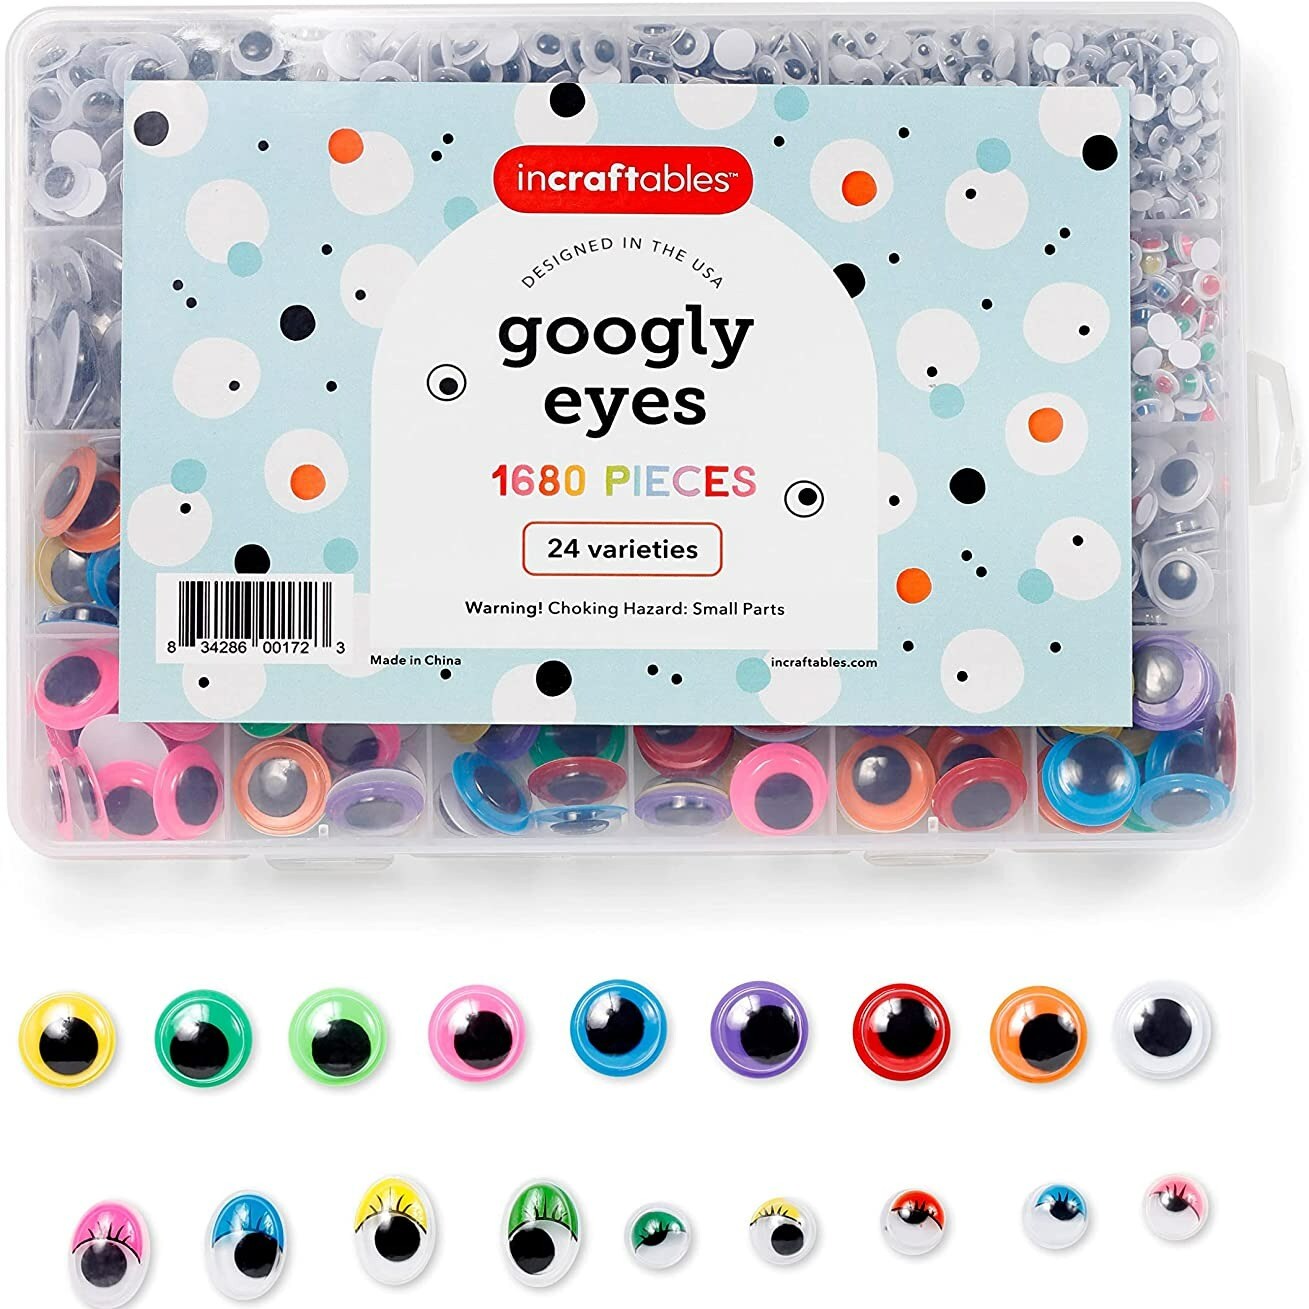 Incraftables Self Adhesive Googly Eyes 1680 pcs Set. Best Small &#x26; Large Colorful Sticky Wiggle Eye for DIY Arts &#x26; Crafts (4 mm to 18 mm). 30 Varieties Value Pack for Adults &#x26; Kids